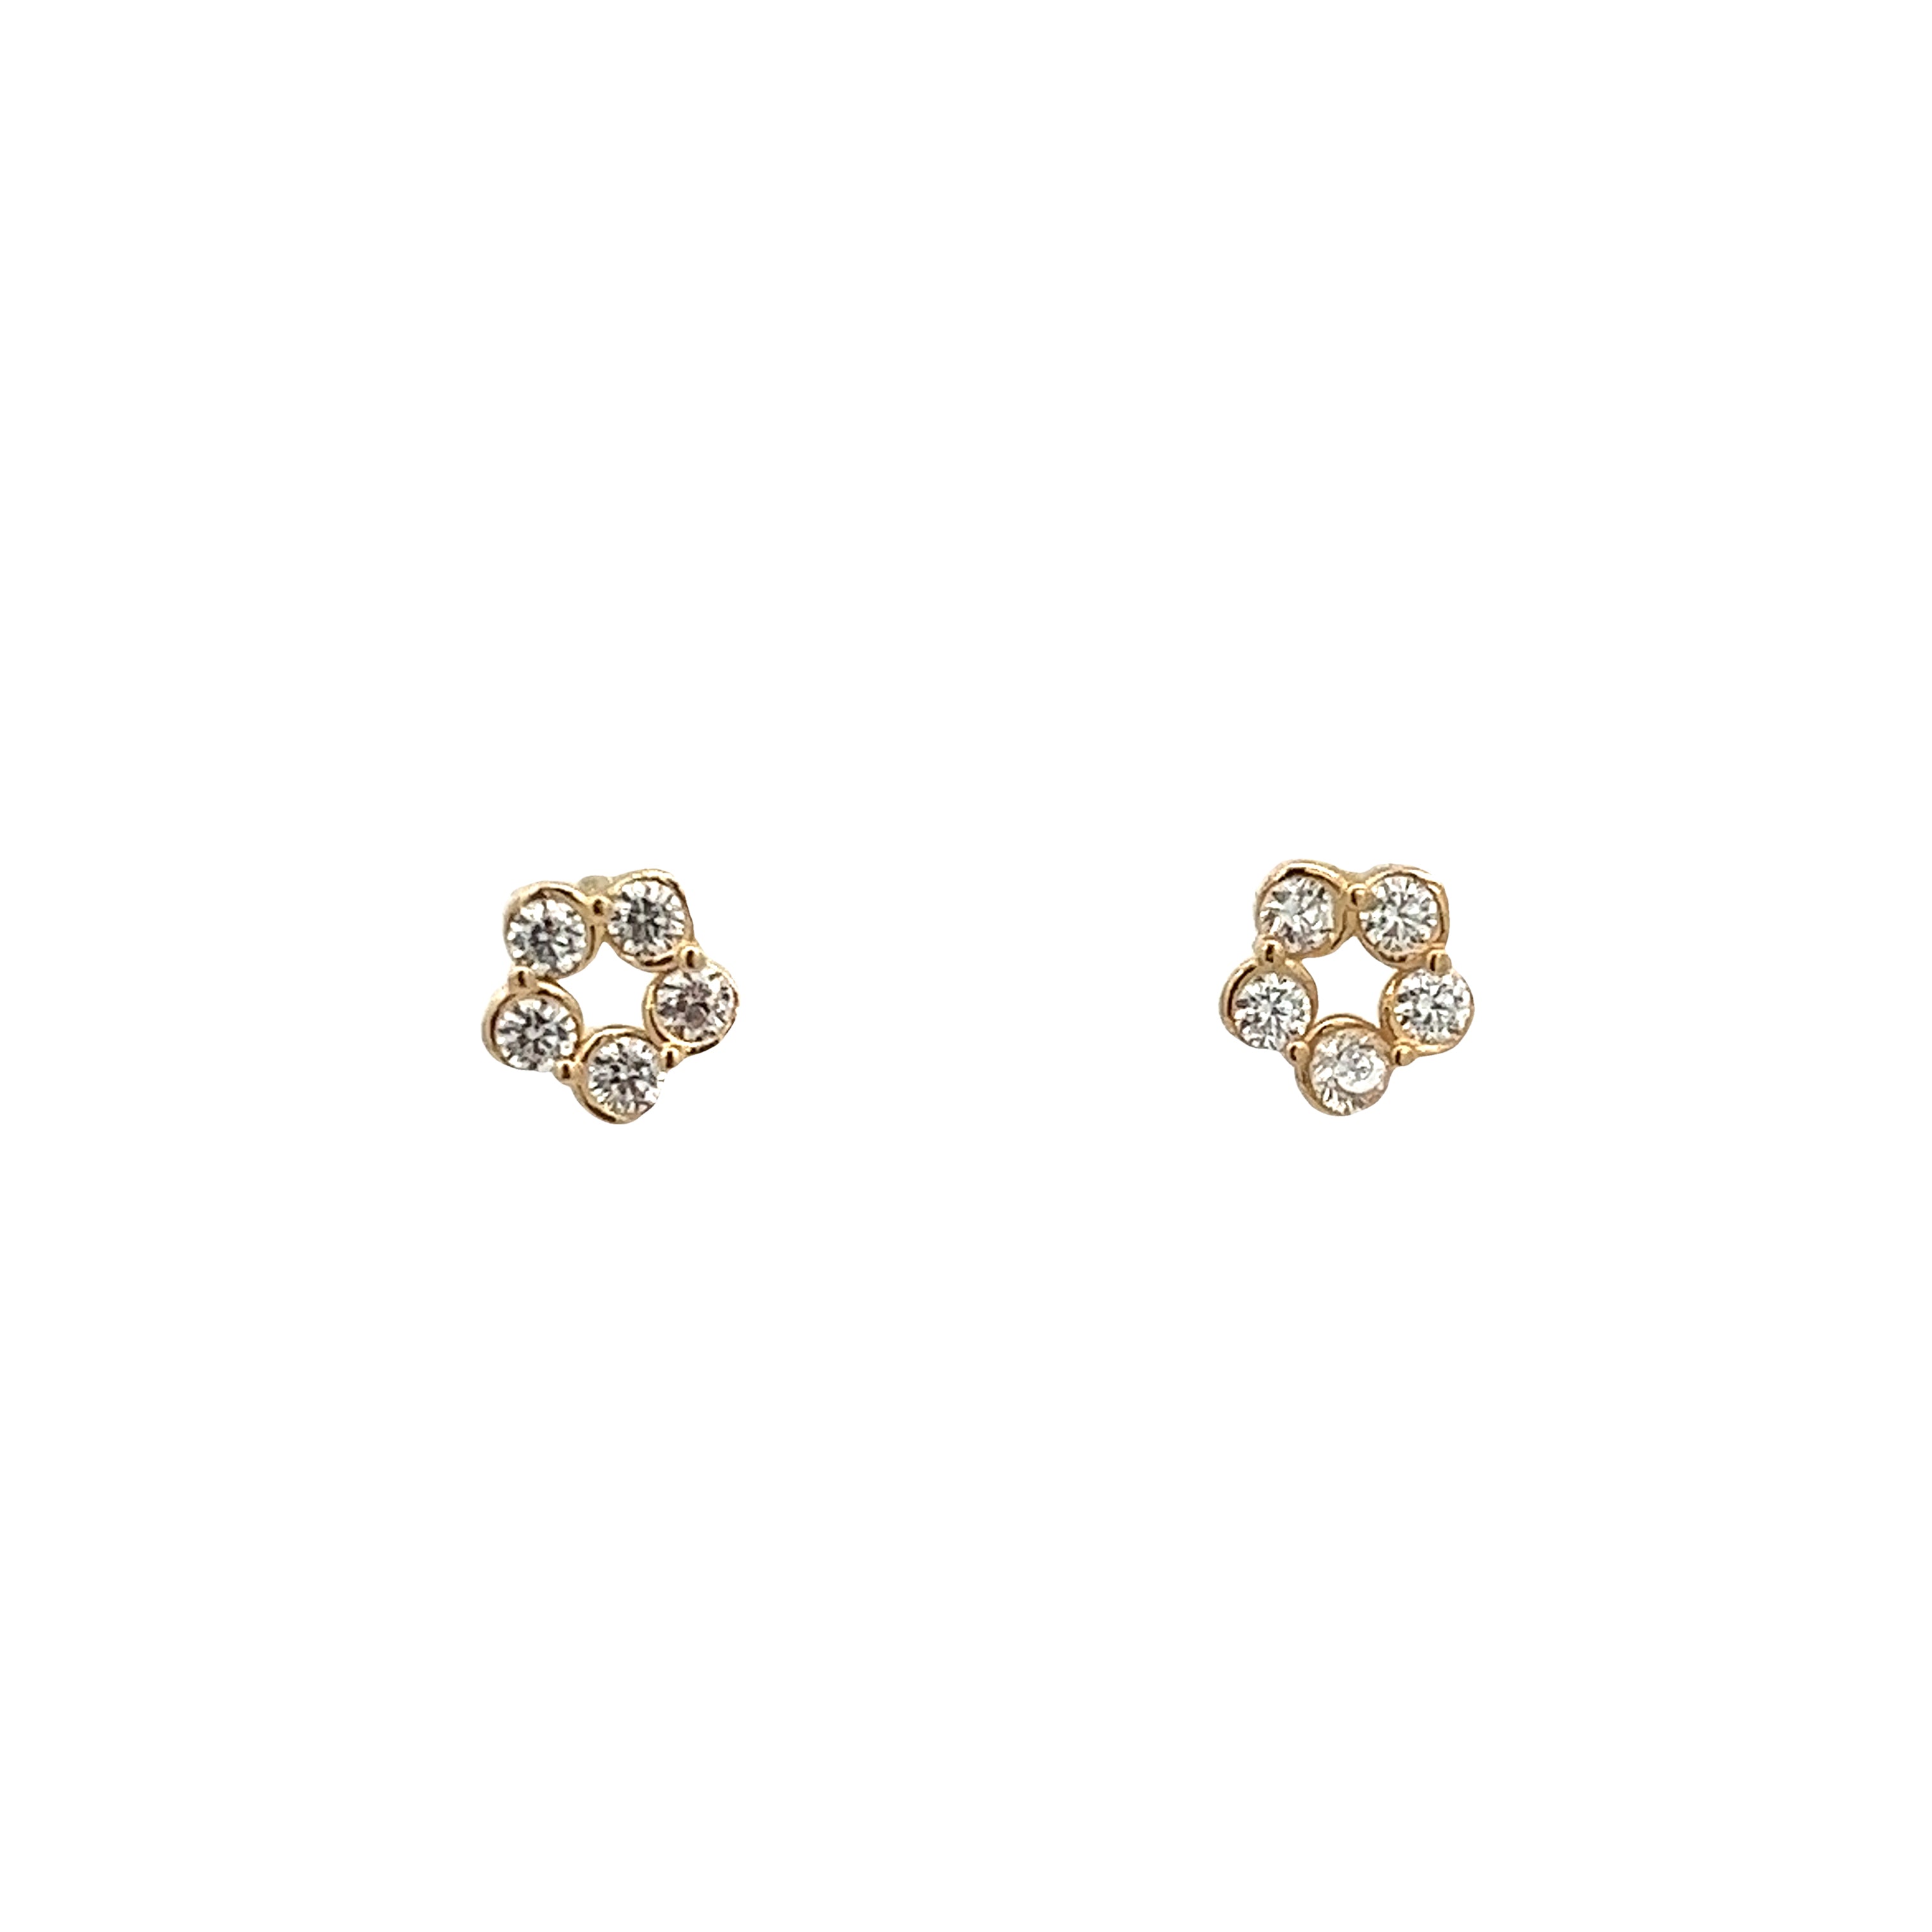 14K GOLD FLOWER EARRINGS WITH CRYSTALS